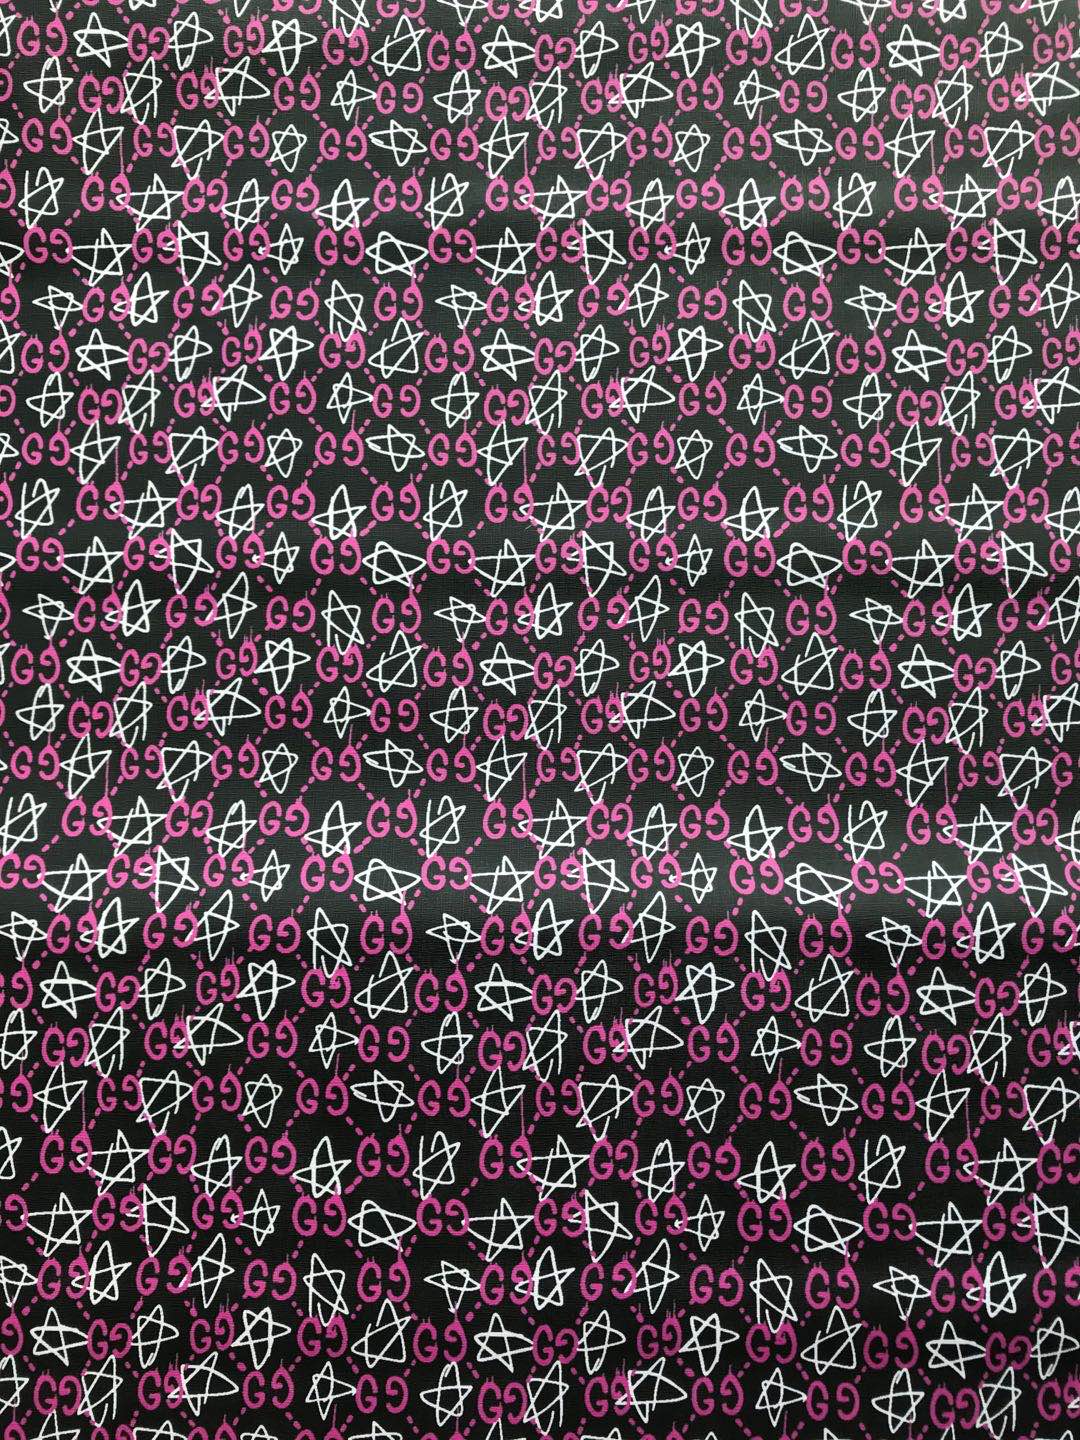 Pink Star Gucci Leather Fabric for Shoe Custom